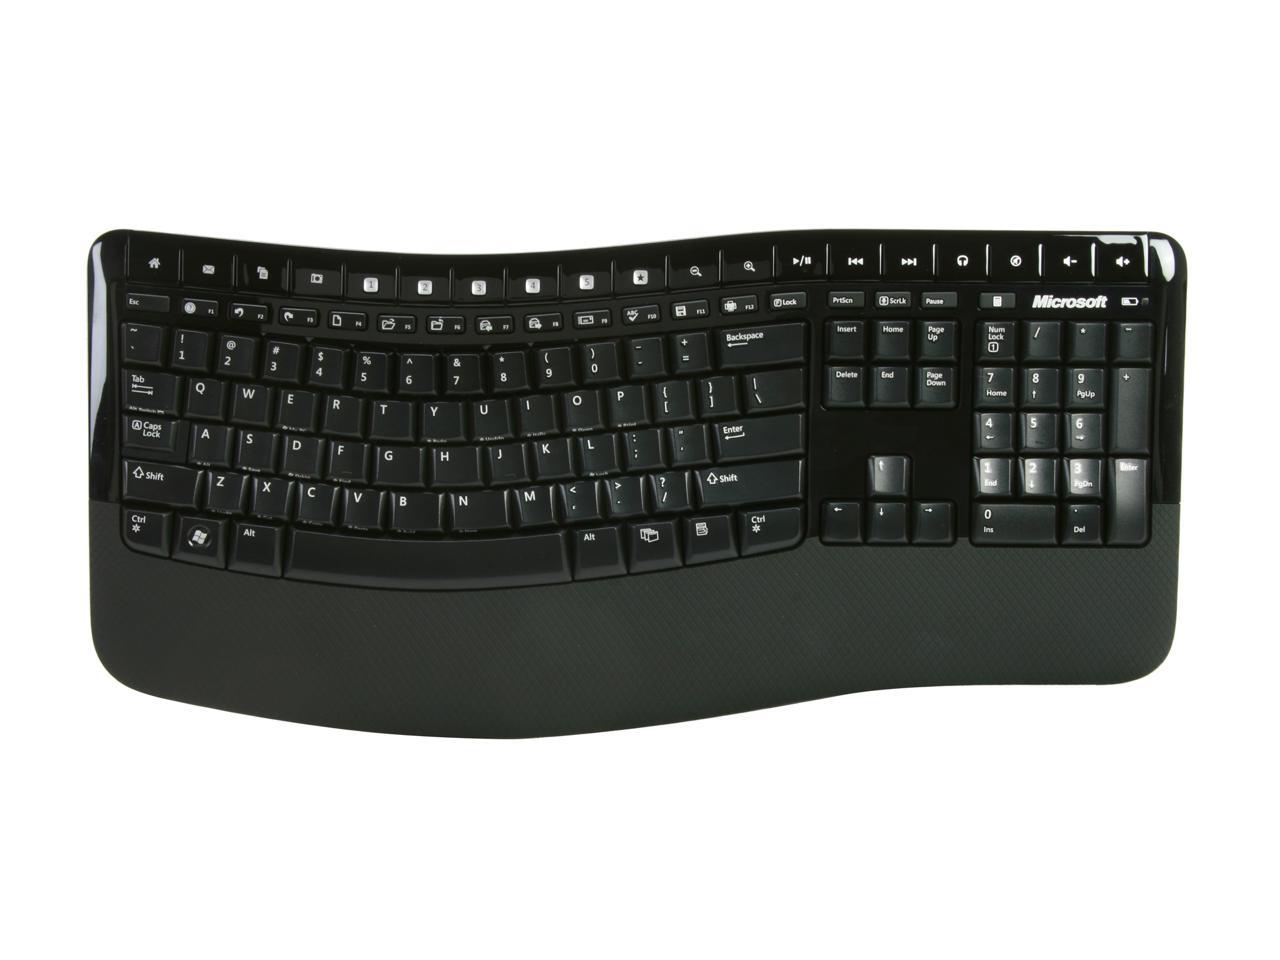 microsoft wireless keyboard 5000 how to connect